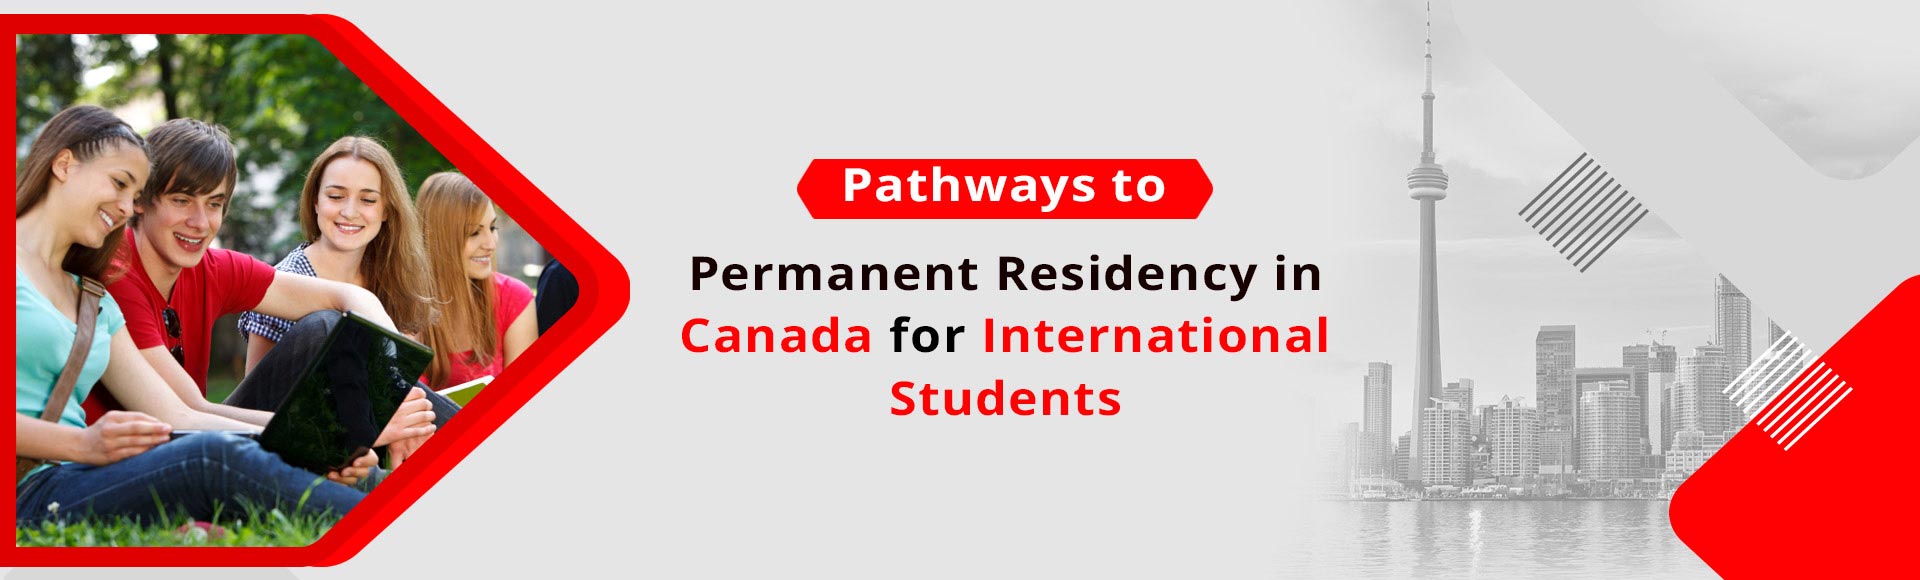 Pathways to Permanent Residency in Canada for International Students